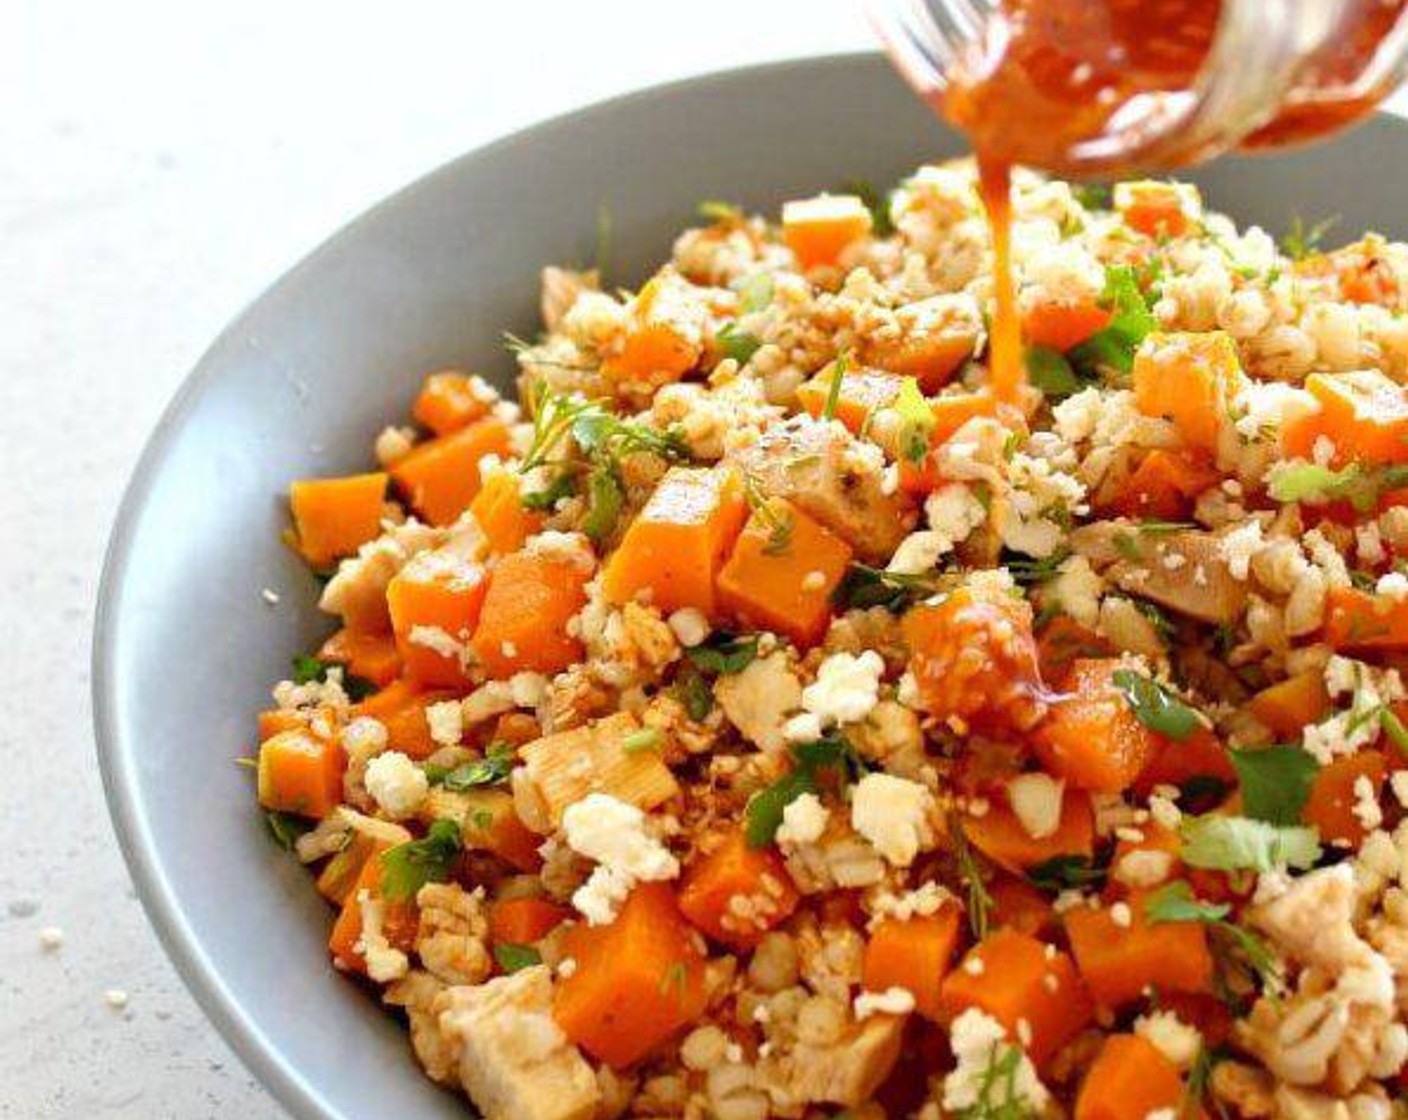 step 6 Remove from the oven and allow to cool. Pile Pearl Barley (1 cup) into a salad bowl. Slice or cube the chicken breasts and gently fold the chicken and butternut into the barley. Top with Feta Cheese (1/2 cup), Fresh Parsley (to taste) and Fresh Dill (to taste).